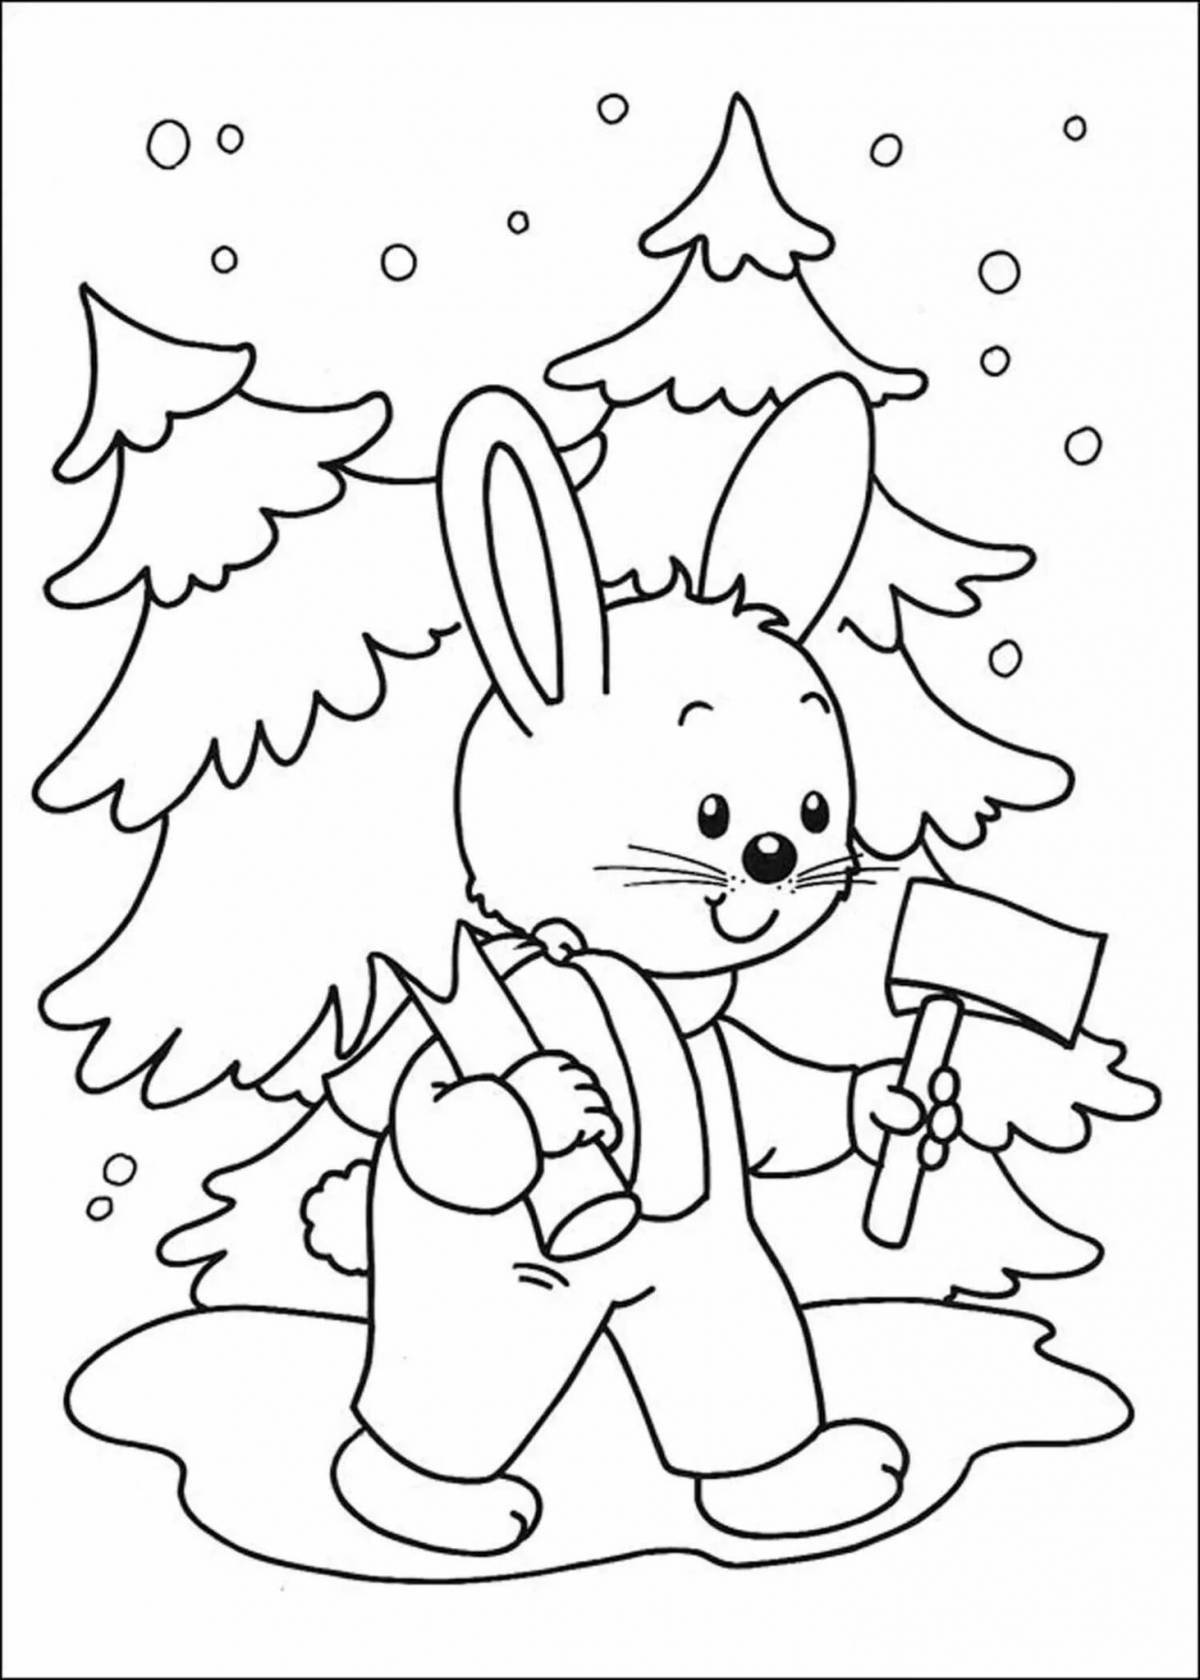 Magical Christmas coloring book for 2 year olds